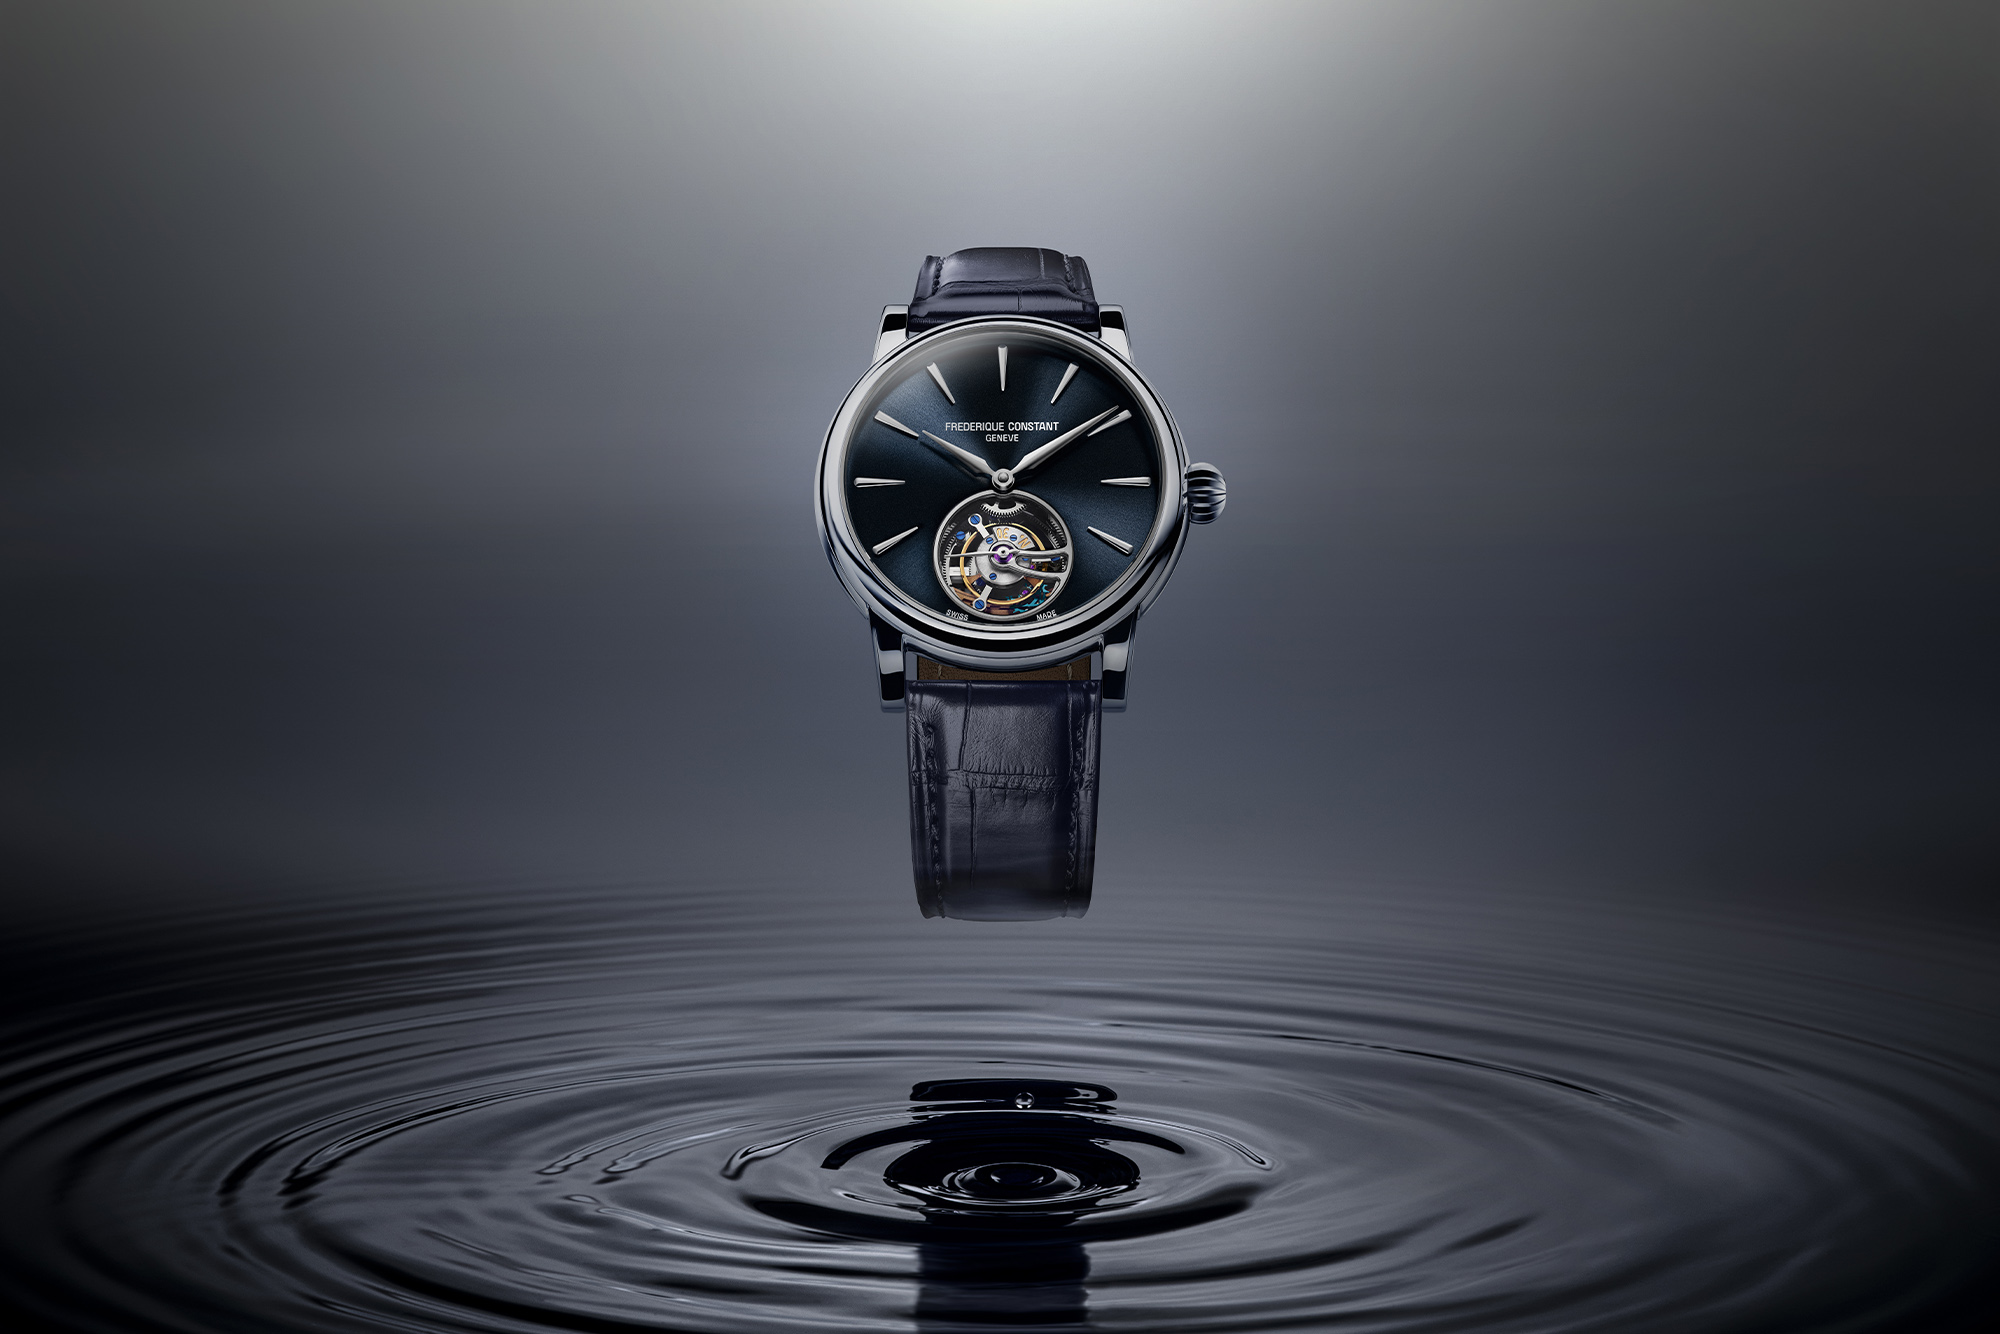 Frederique Constant Watch above a splash of water in black